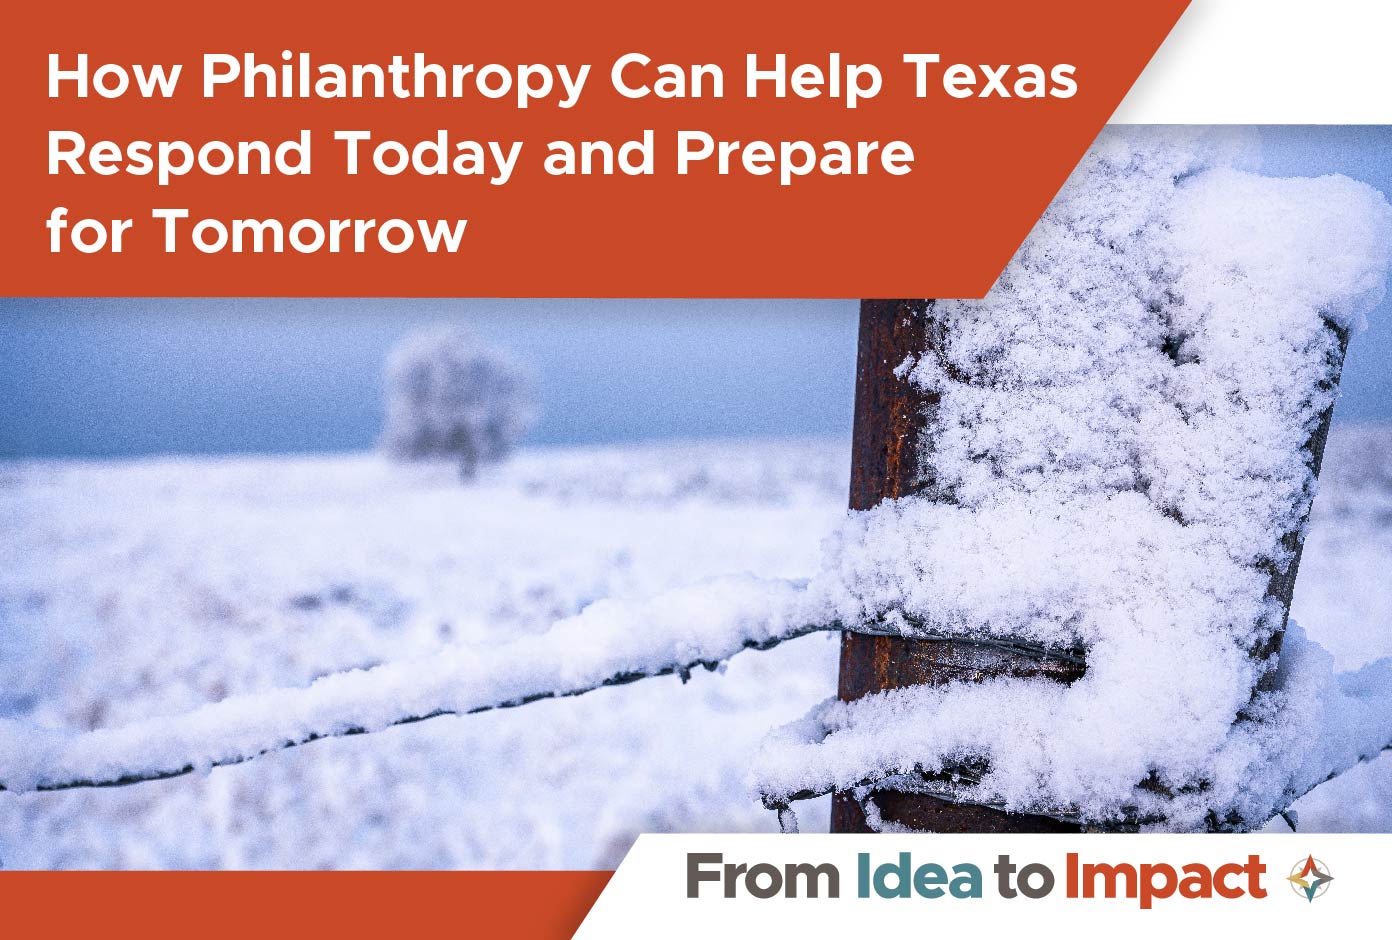 How Philanthropy Can Help Texas Respond Today and Prepare for Tomorrow